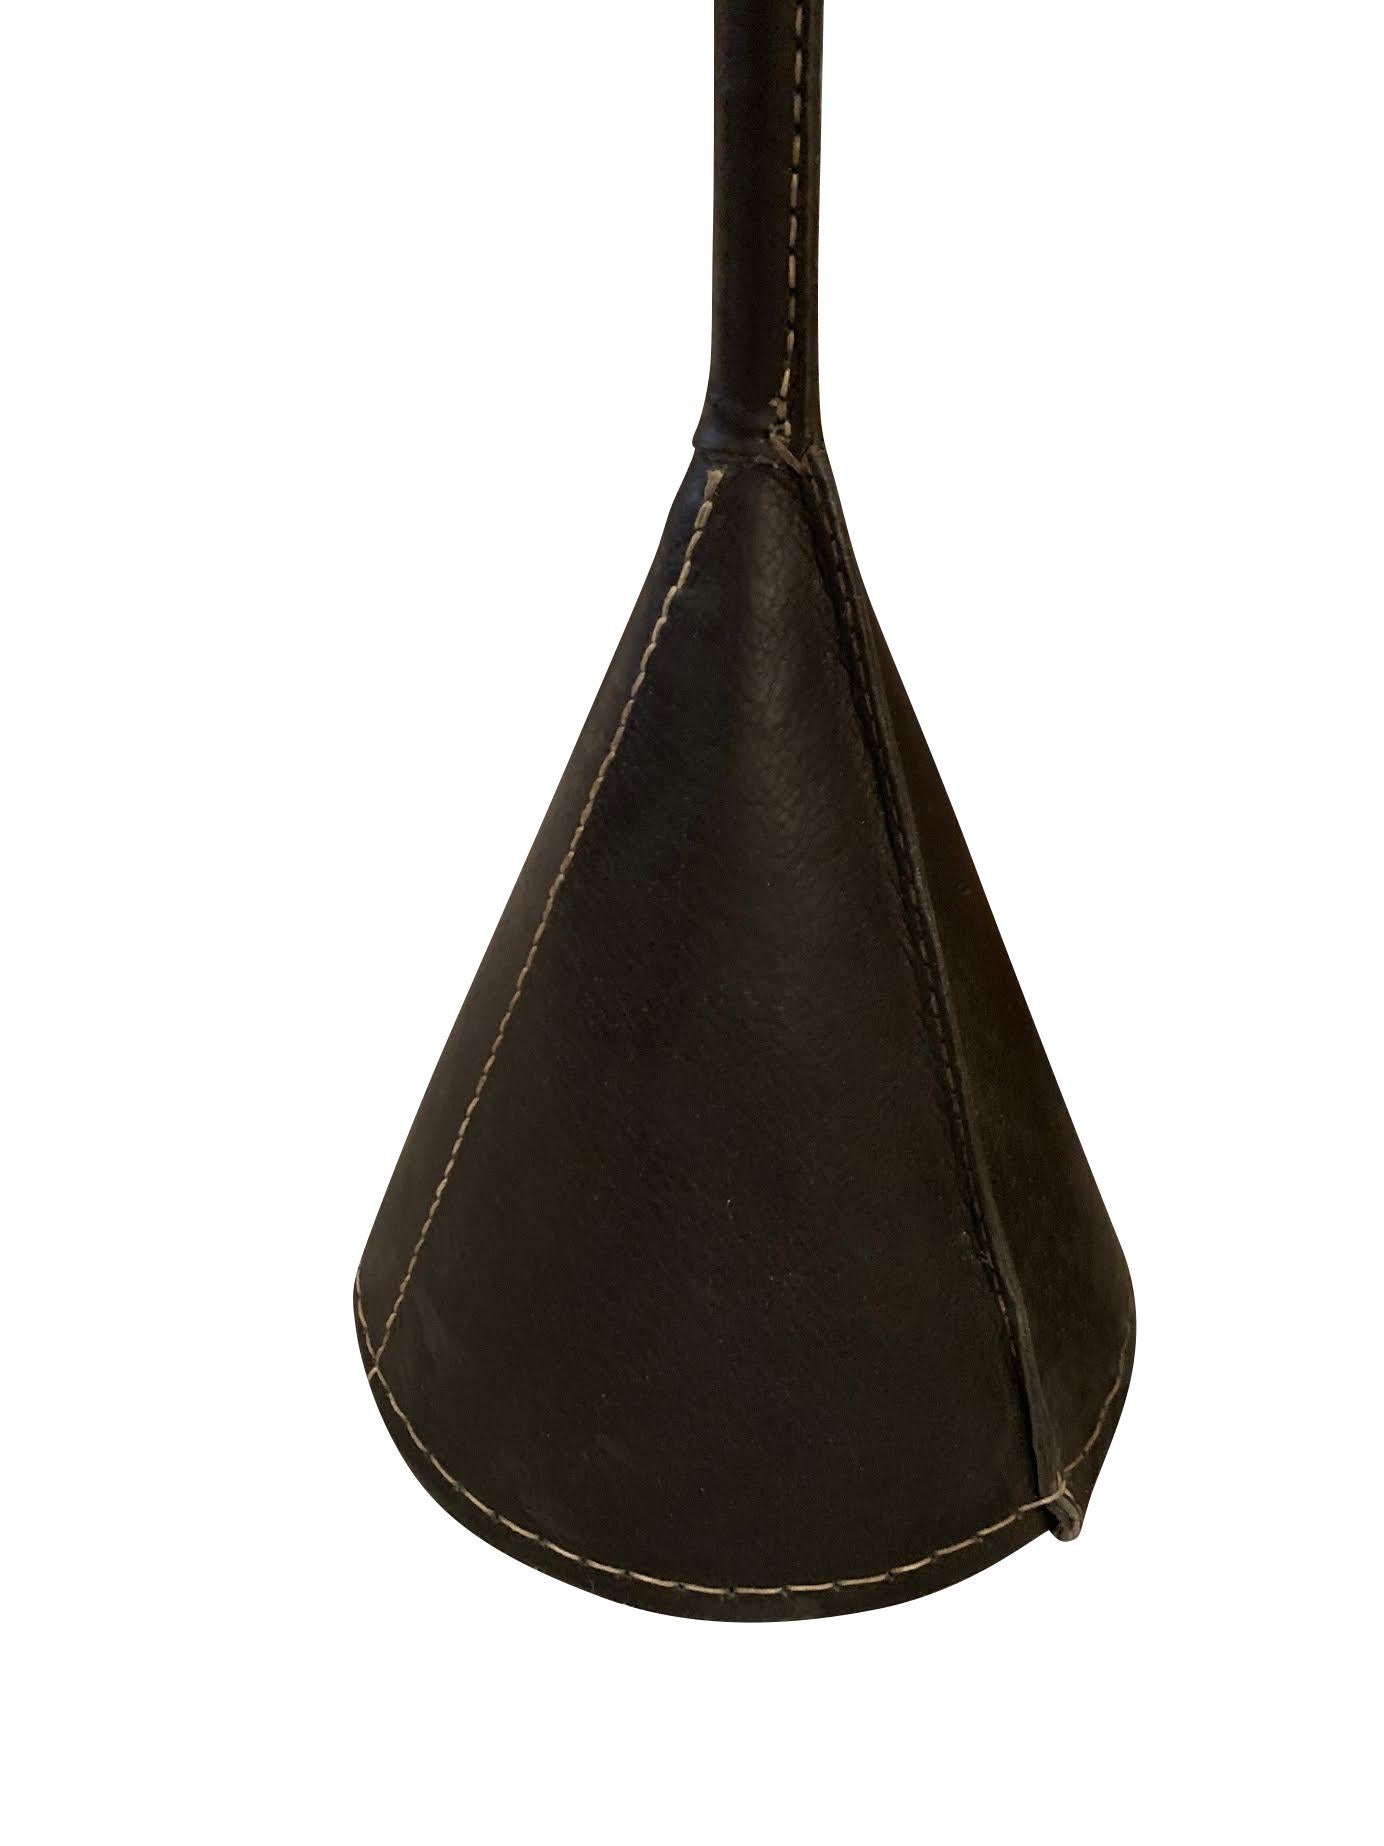 Mid Century Spanish all black leather floor lamp designed by Valenti.
Shade , post and floor base all covered in black leather.
Shade adjusts to direct light.
Also available in brown (L1120) and wine (L1118)
Shade 9